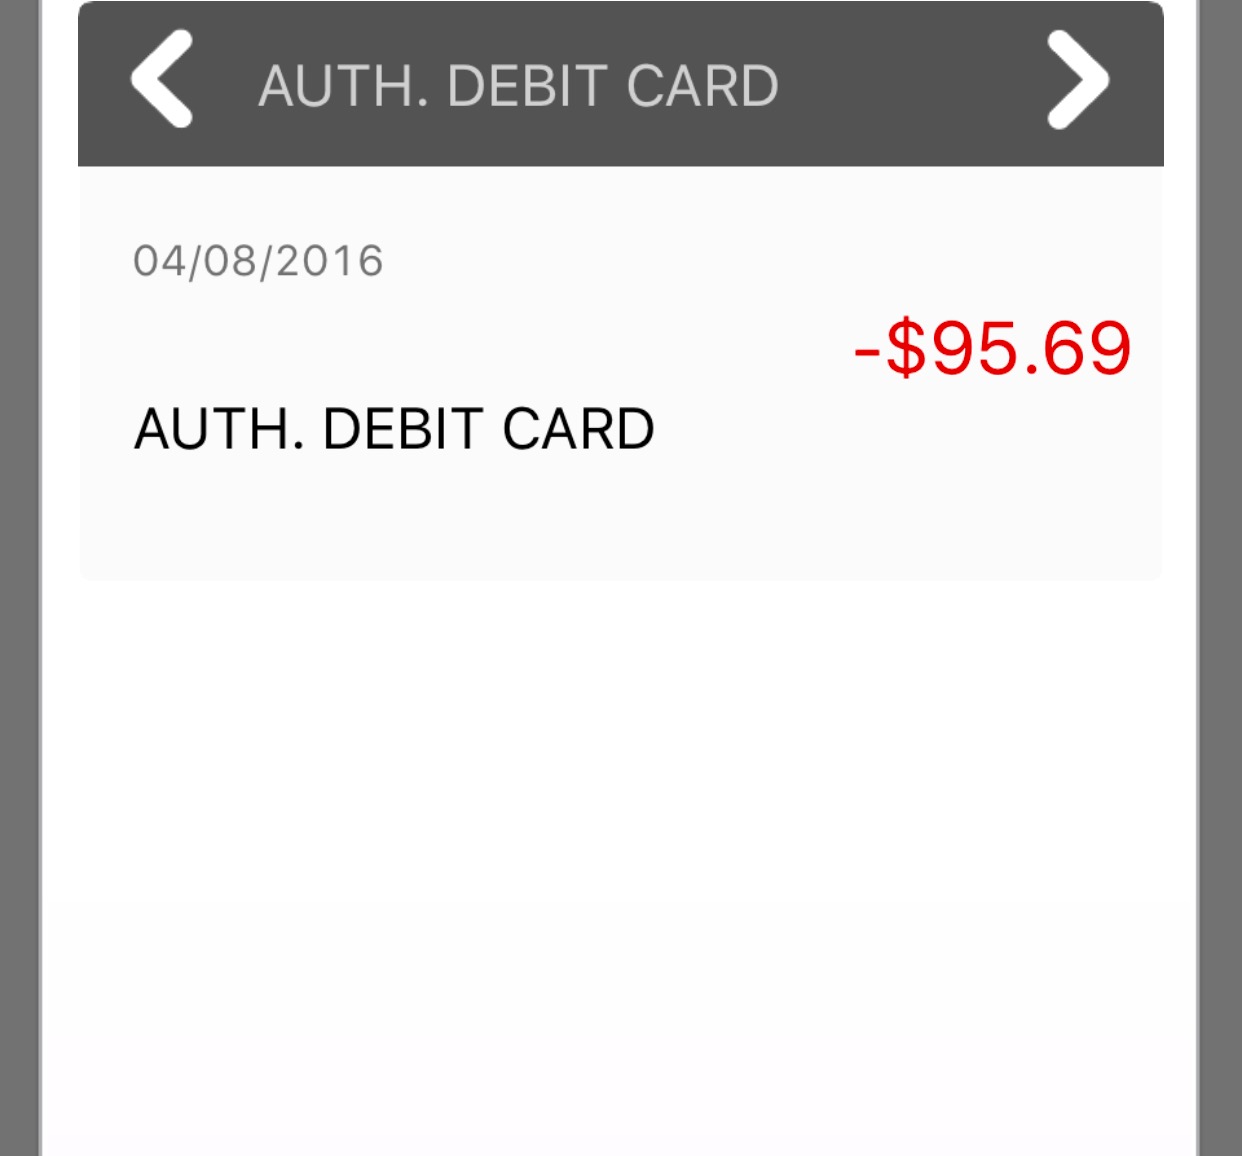 actual charge to my debit card as verified upon phone call to my bank. $5.69 more than they were supposed to. This shows how fraudulent they are. 